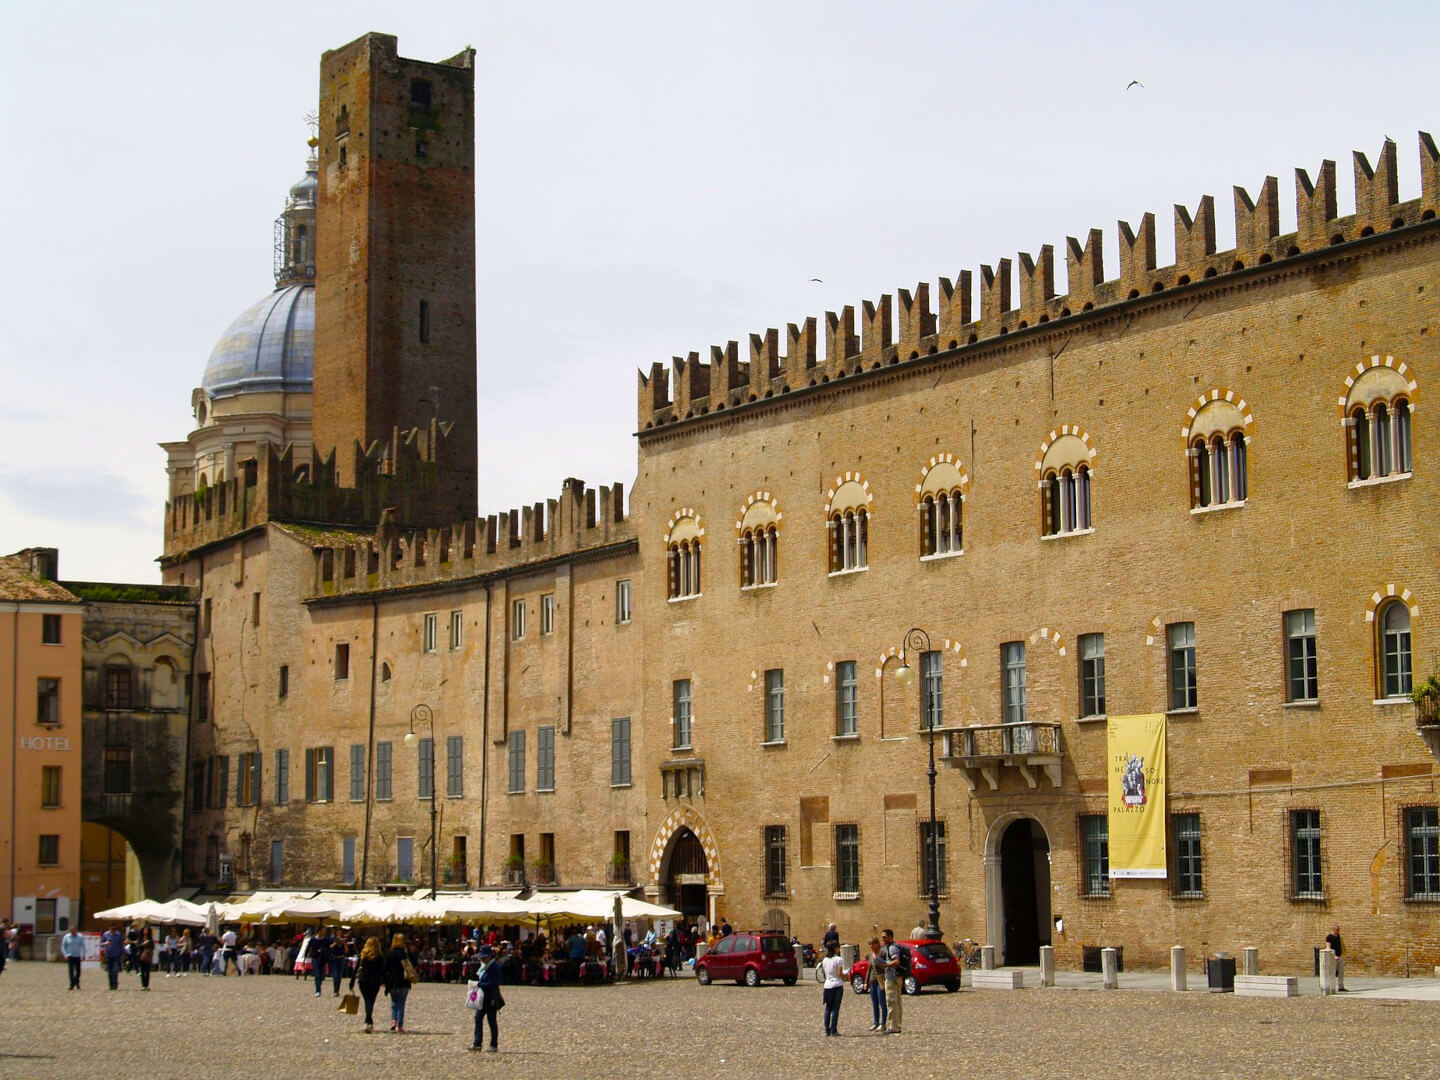 PALAZZO DUCALE